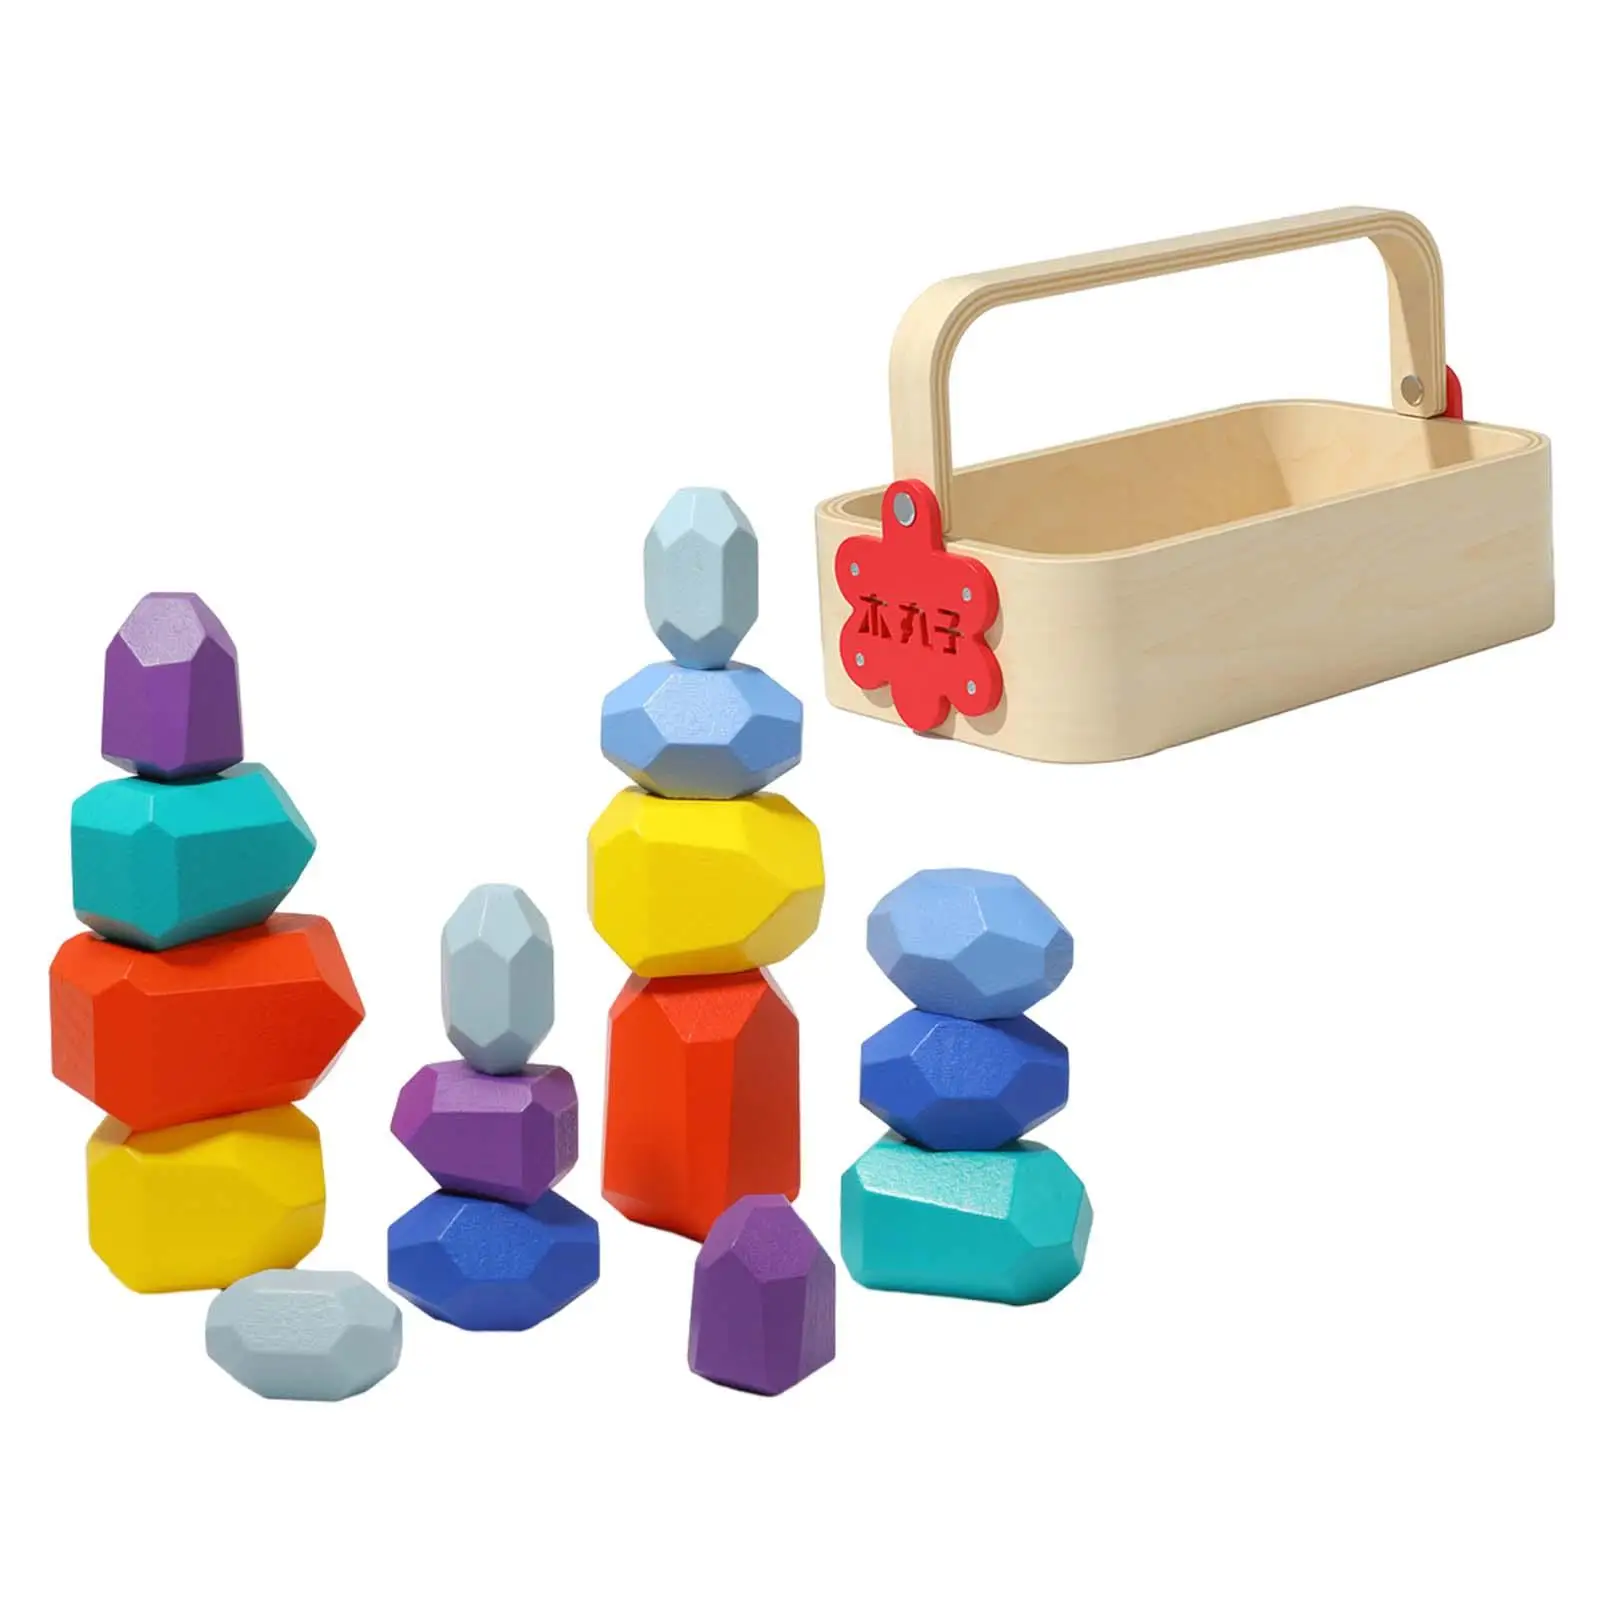 Balancing Stacking Stones Rocks with Storage Case Preschool Learning Building Blocks Wood for Kid 3 Years up Boys Birthday Gifts